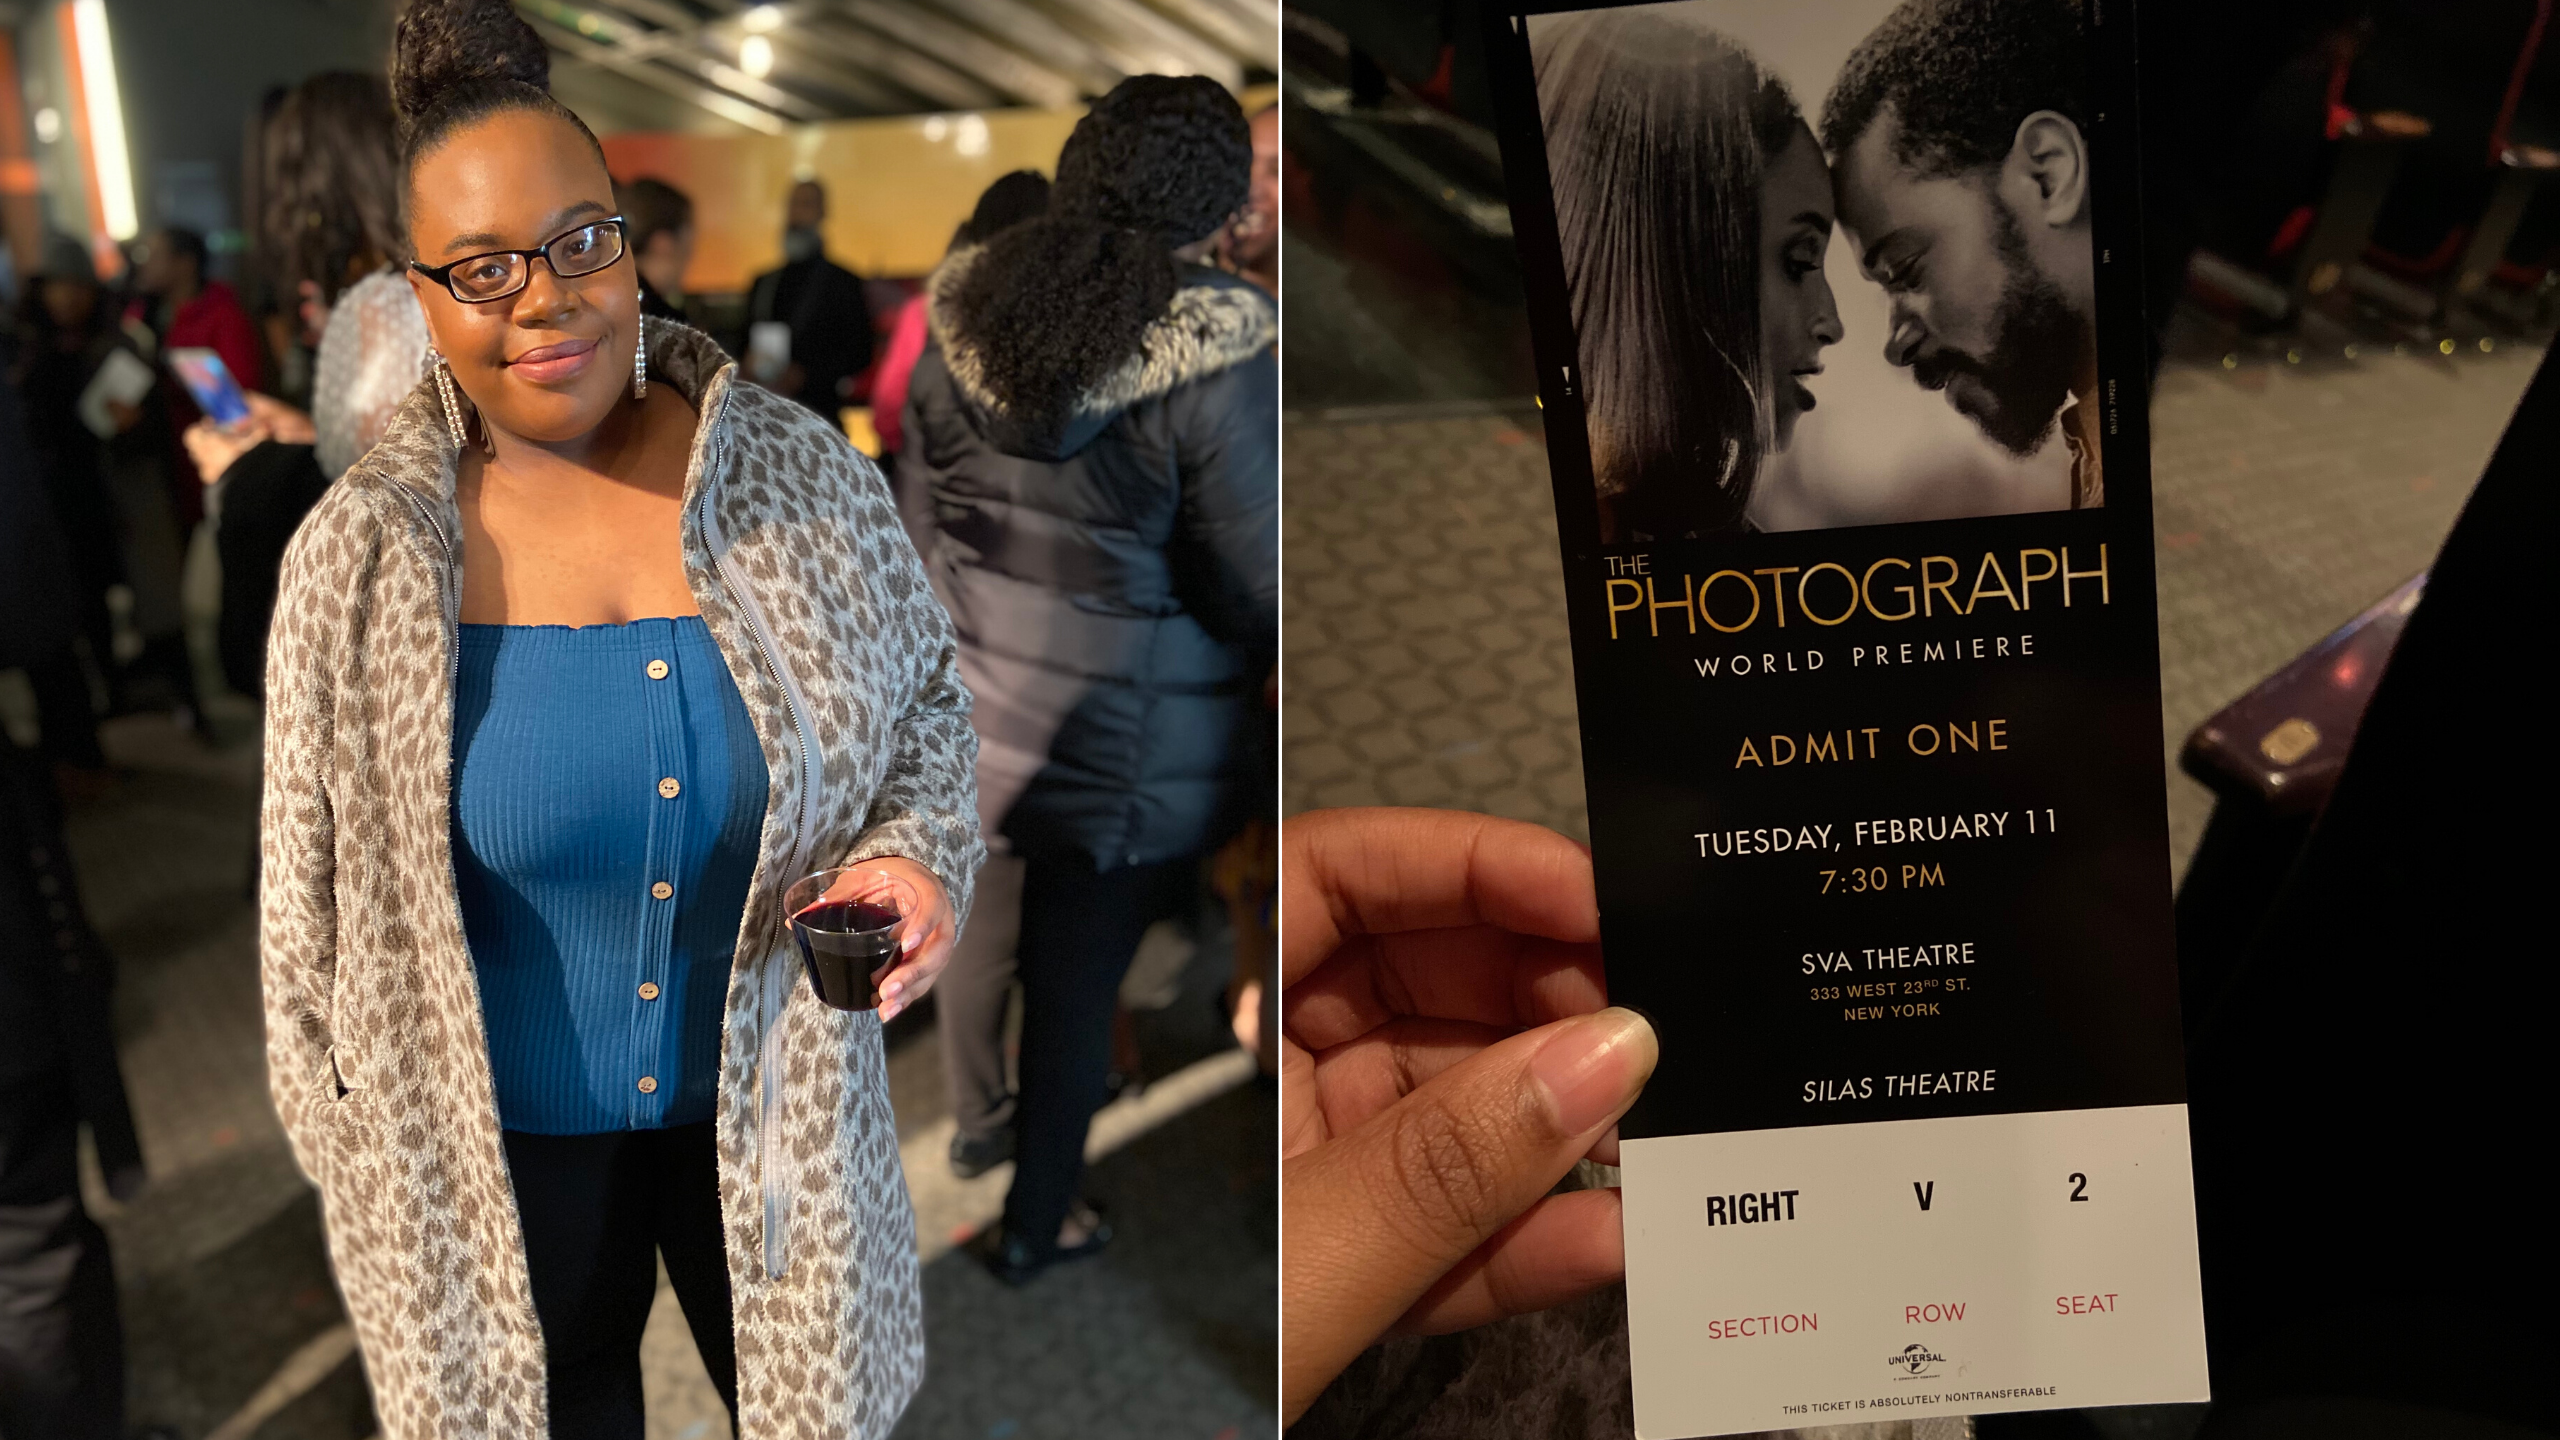 My Experience At The Photograph World Premiere